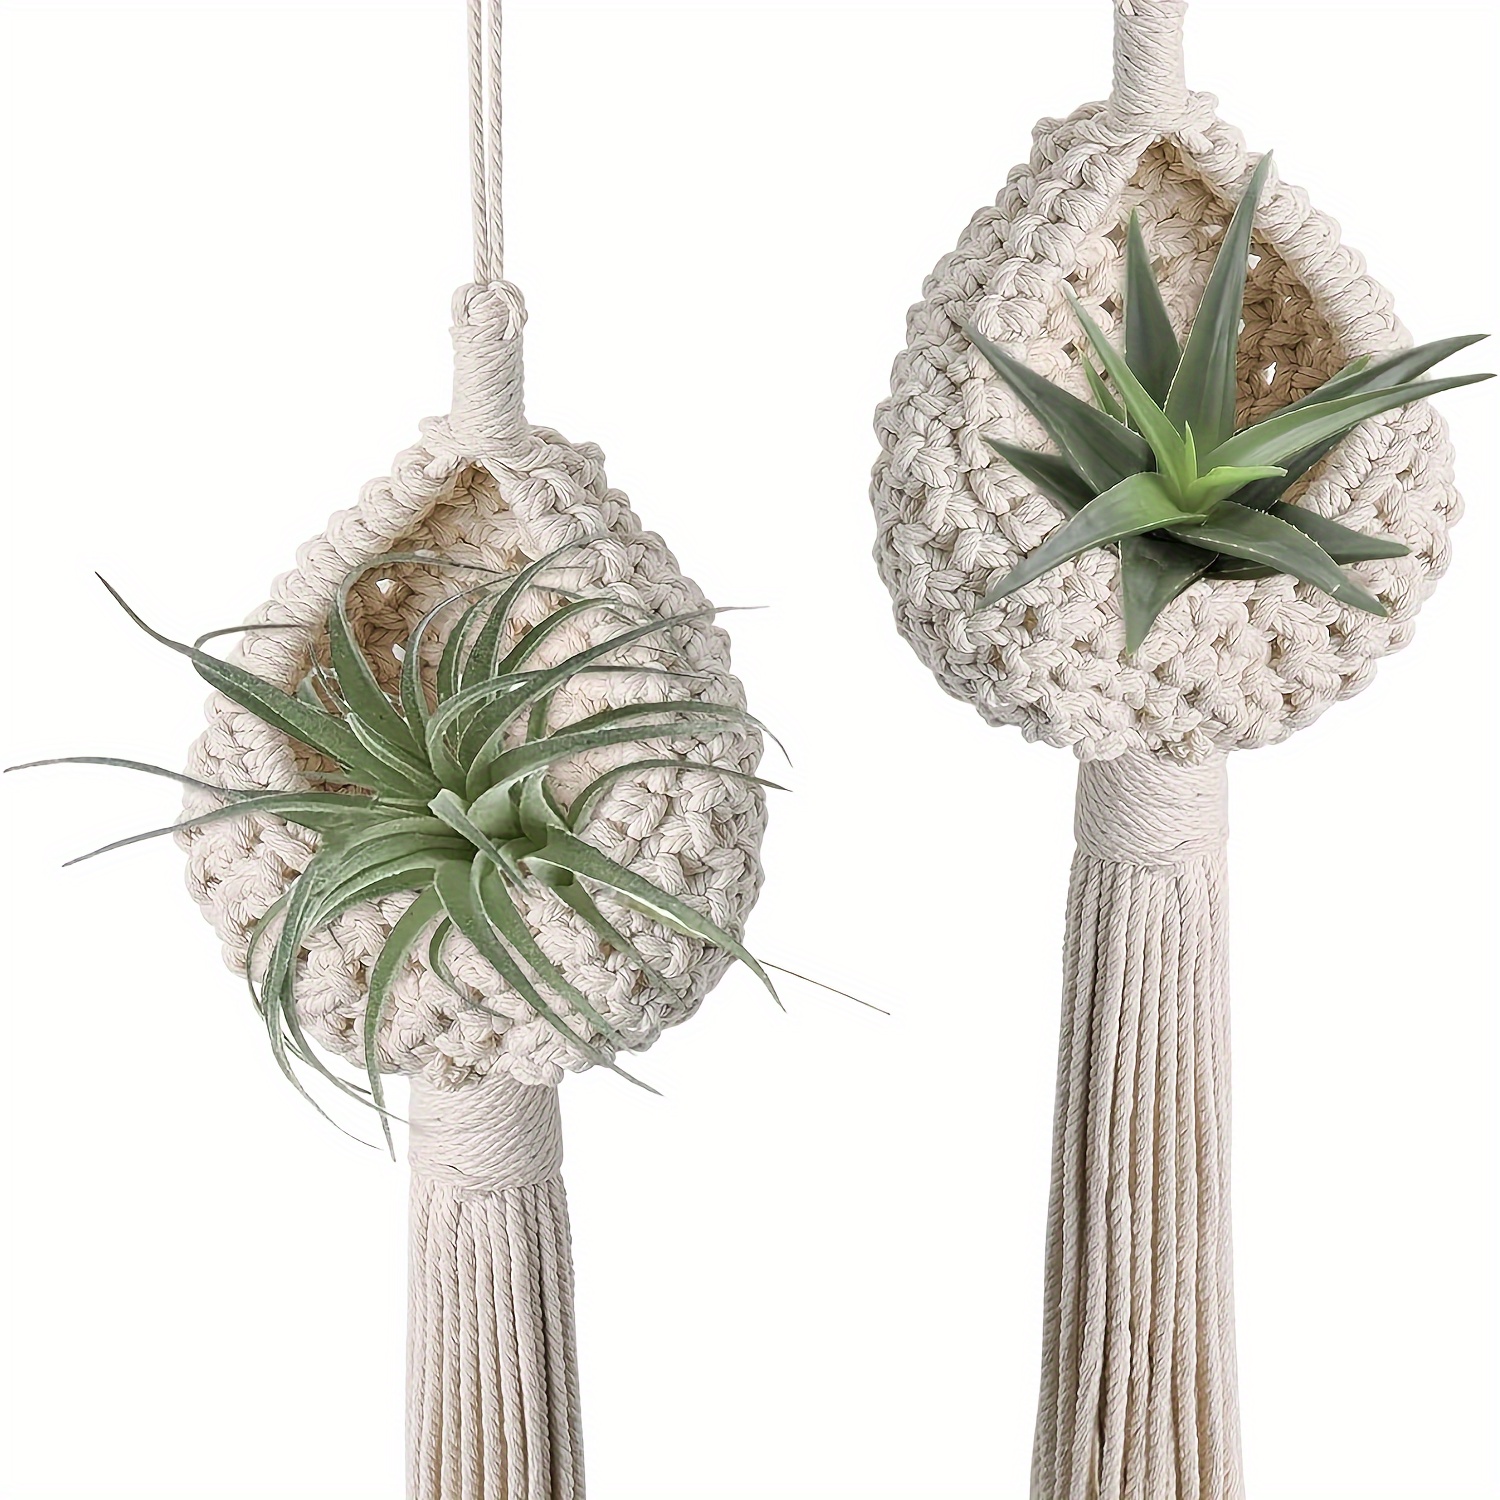 

1pc, Macrame Plant Hangers Air Plants Hanging Basket, Boho Macrame Wall Hanging For Indoor Outdoor Home Decor Outdoor Hanging Planter Basket Cotton Rope Cream Coloured